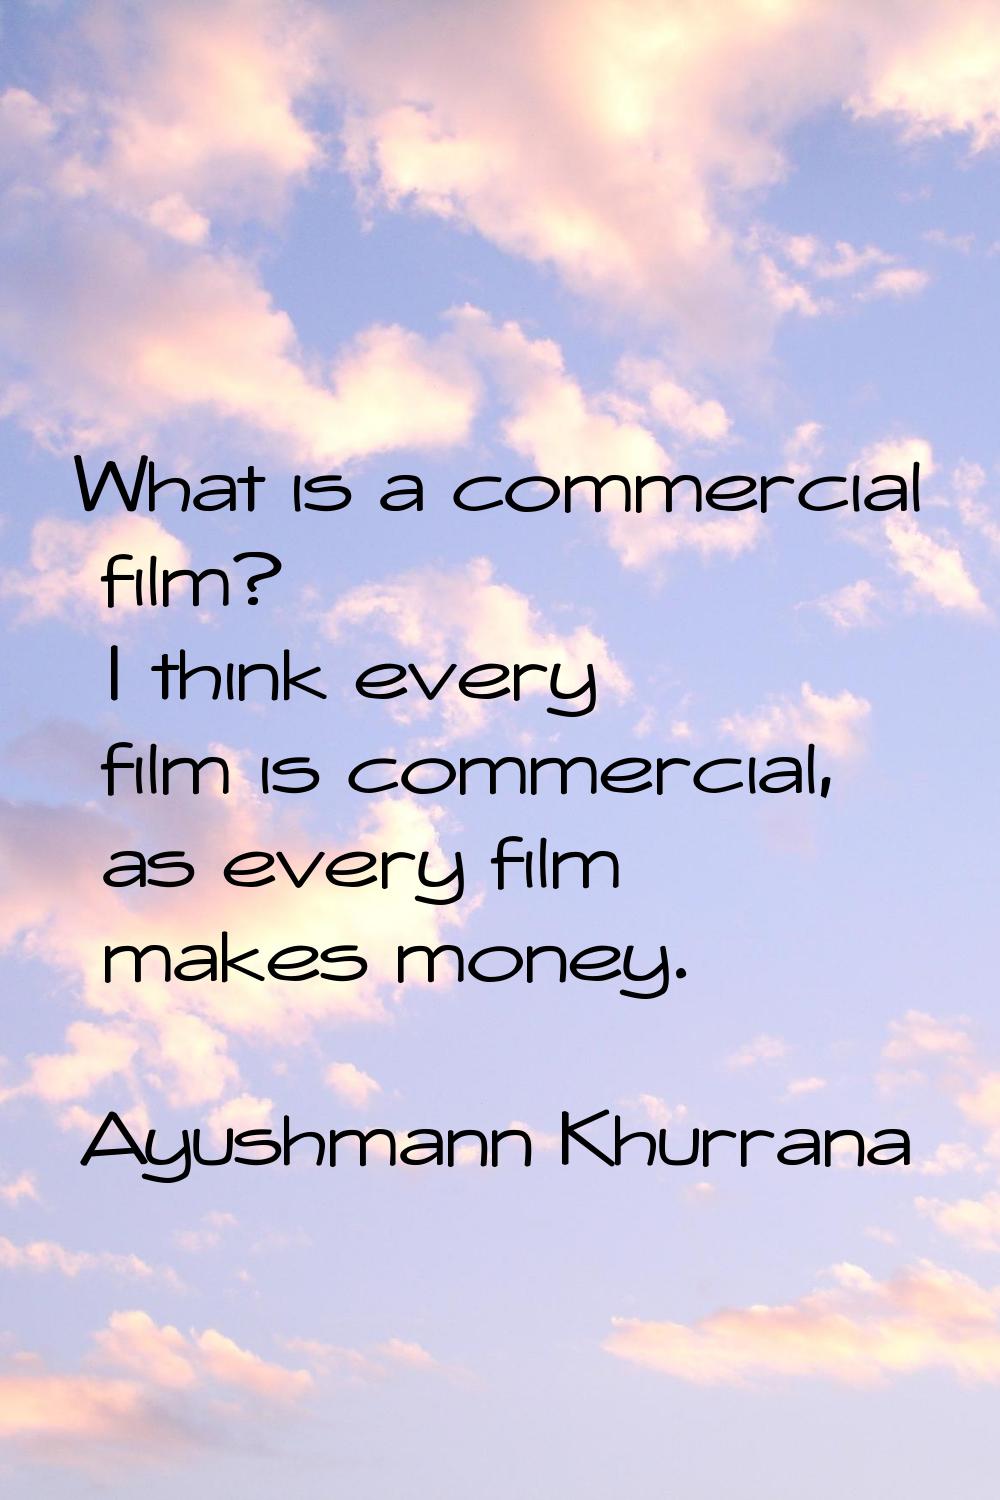 What is a commercial film? I think every film is commercial, as every film makes money.